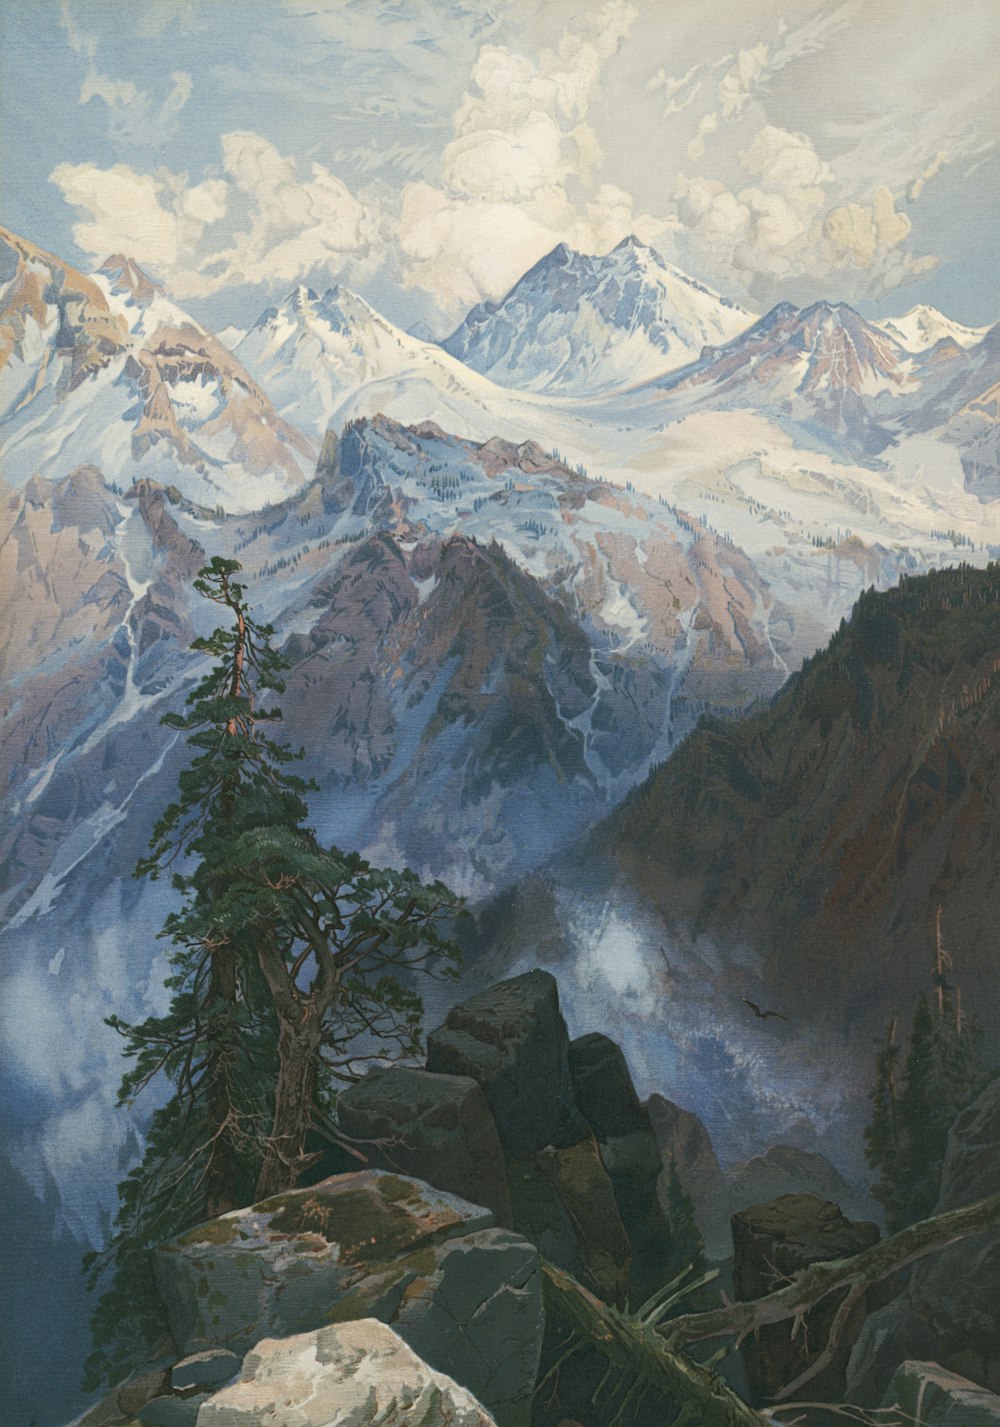 a painting of a mountain range with a pine tree in the foreground